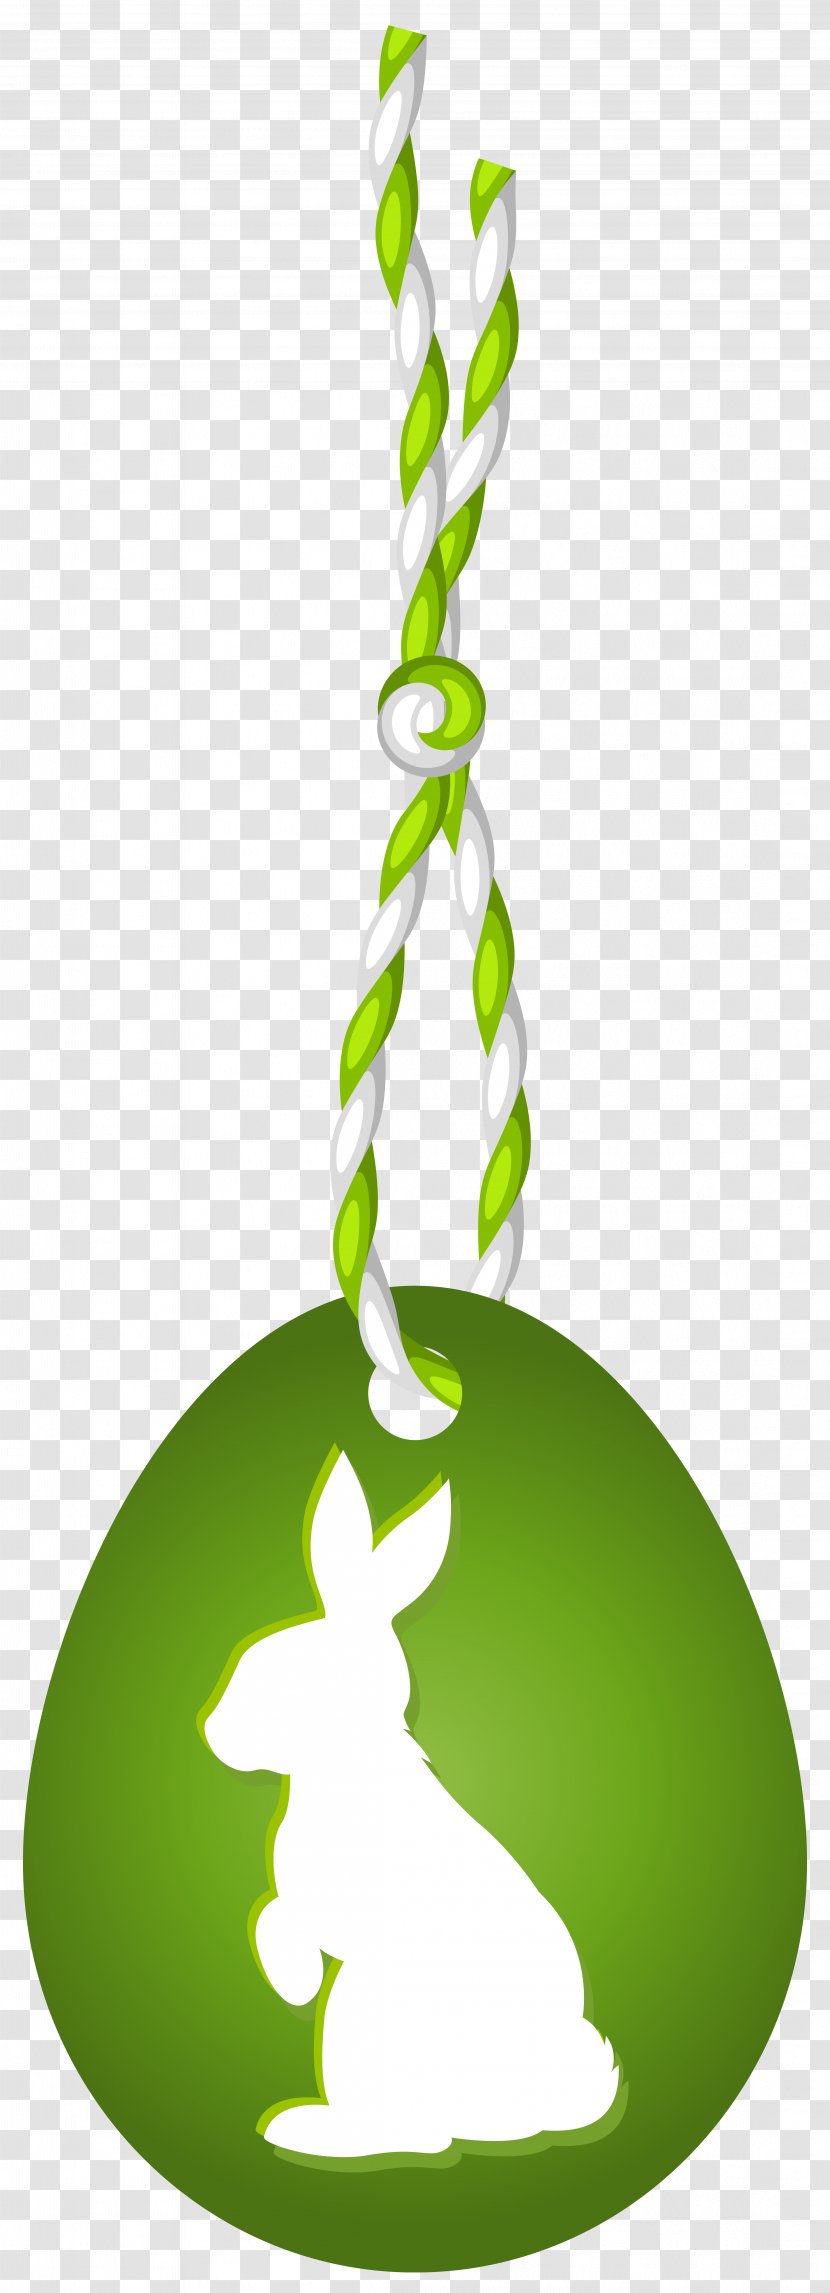 Easter Egg Clip Art - Green - Hanging With Bunny Image Transparent PNG